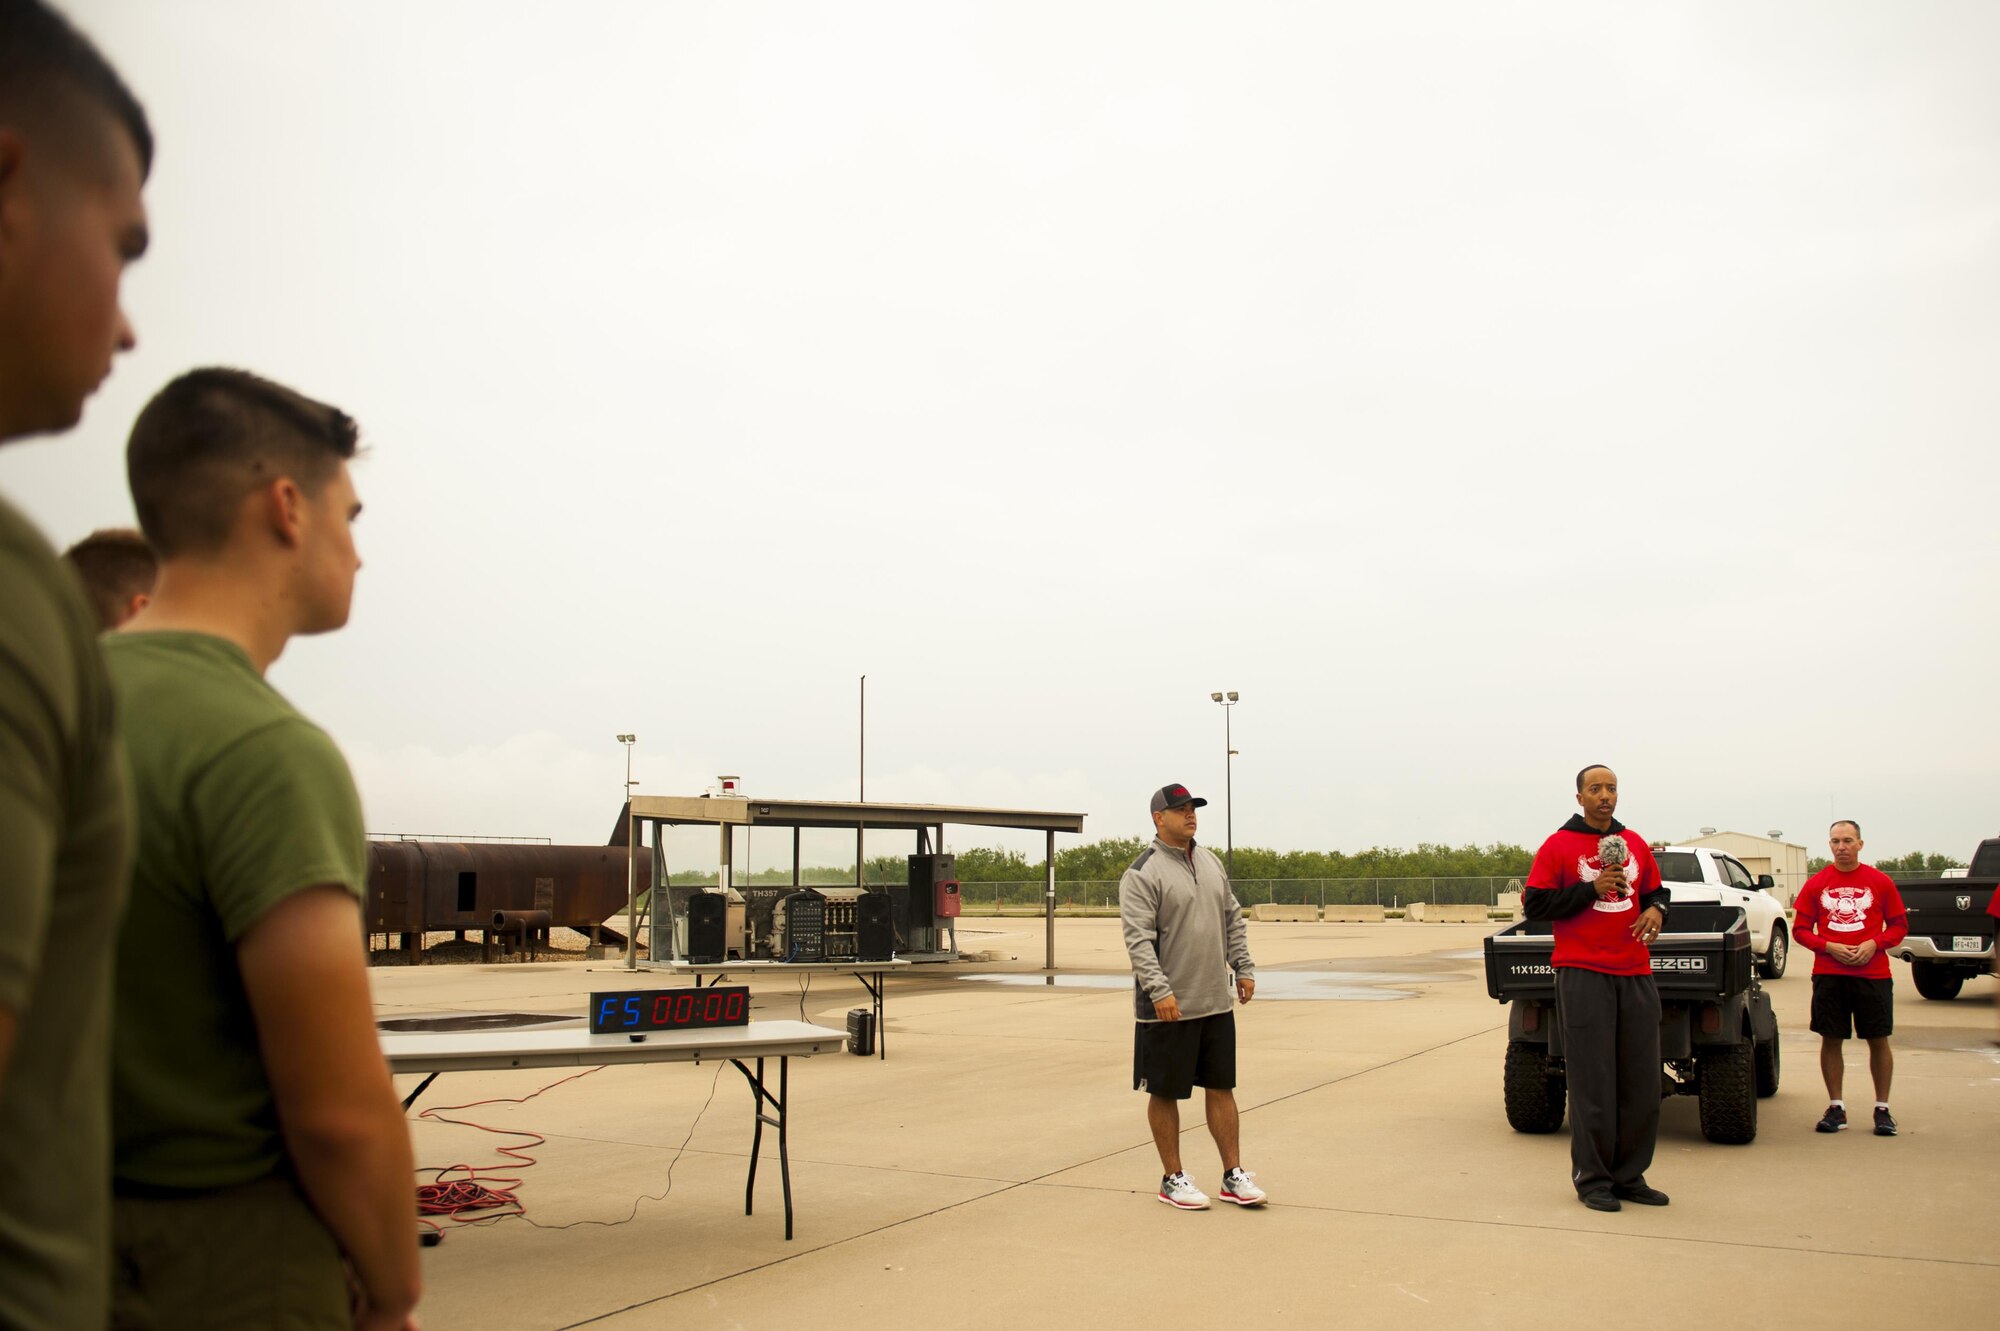 U.S. Air Force Tech. Sgt. Edward Thomas, 312th Training Squadron instructor, briefs the participants of the fourth annual Blood, Sweat and Stairs event at the Louis F. Garland Department of Defense Fire Academy on Goodfellow Air Force Base, Texas, Sept. 30, 2017. Blood, Sweat and Stairs was held to remember the fallen firefighters who lost their lives on 9/11. (U.S. Air Force photo by Senior Airman Scott Jackson/Released)